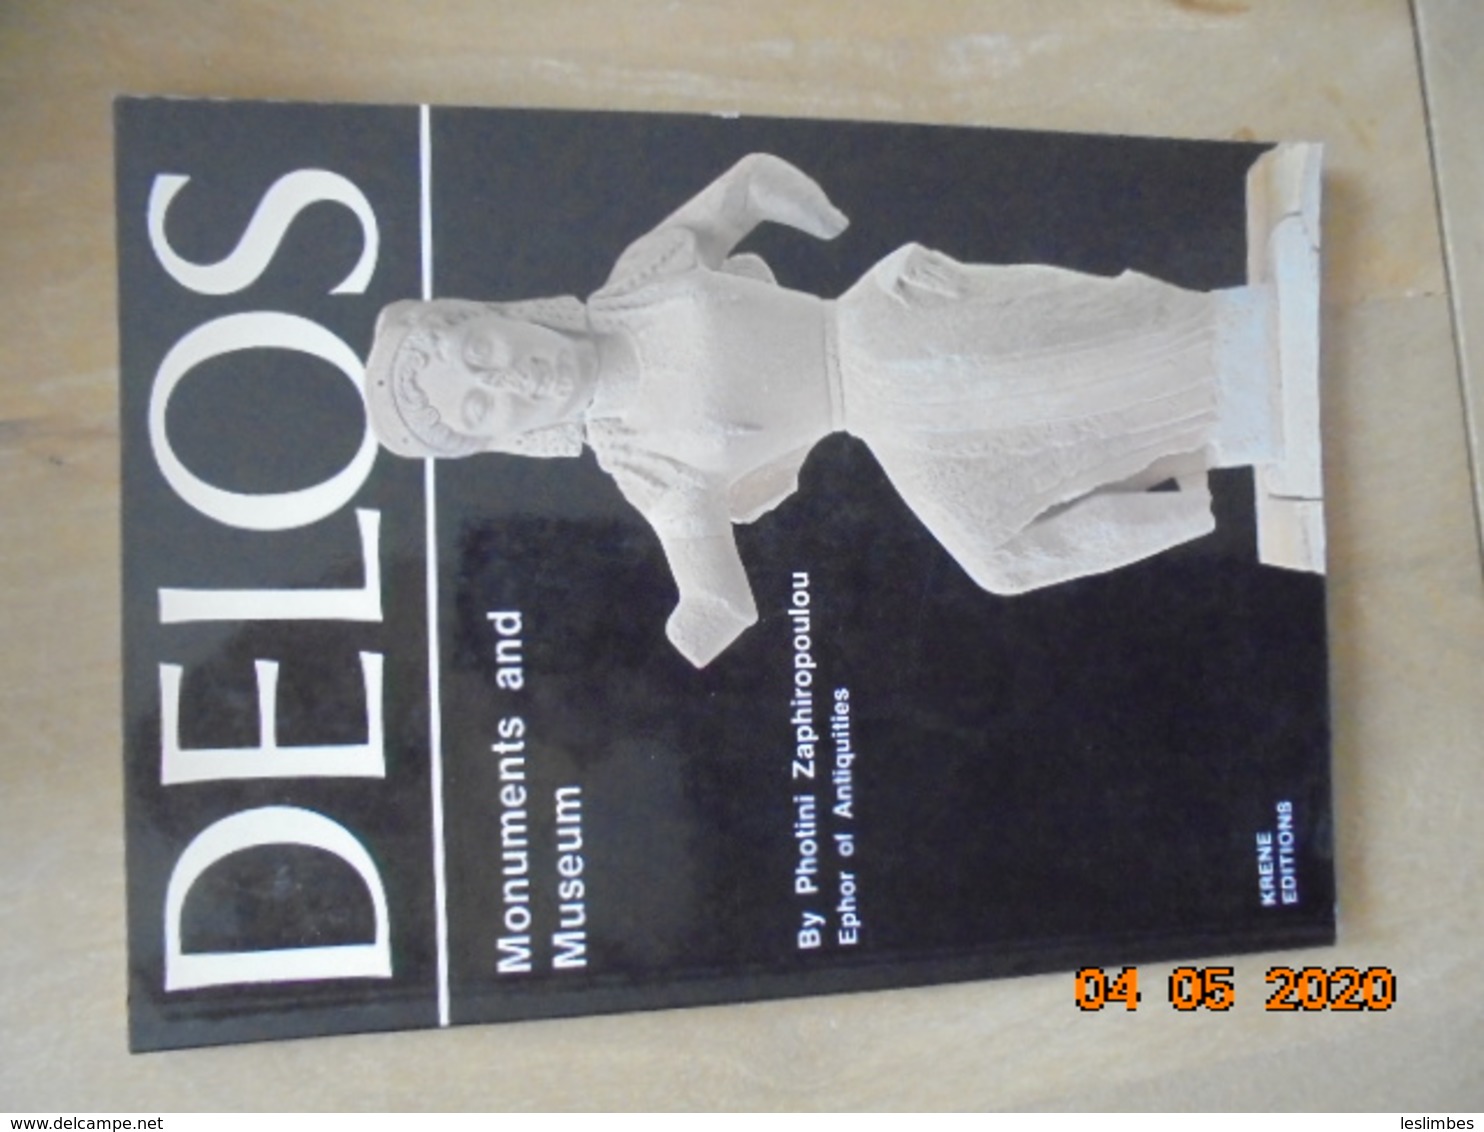 Delos: Monuments And Museum By Photini Zaphiropoulou. Krene Editions, 1983. Greece - Travel/ Exploration